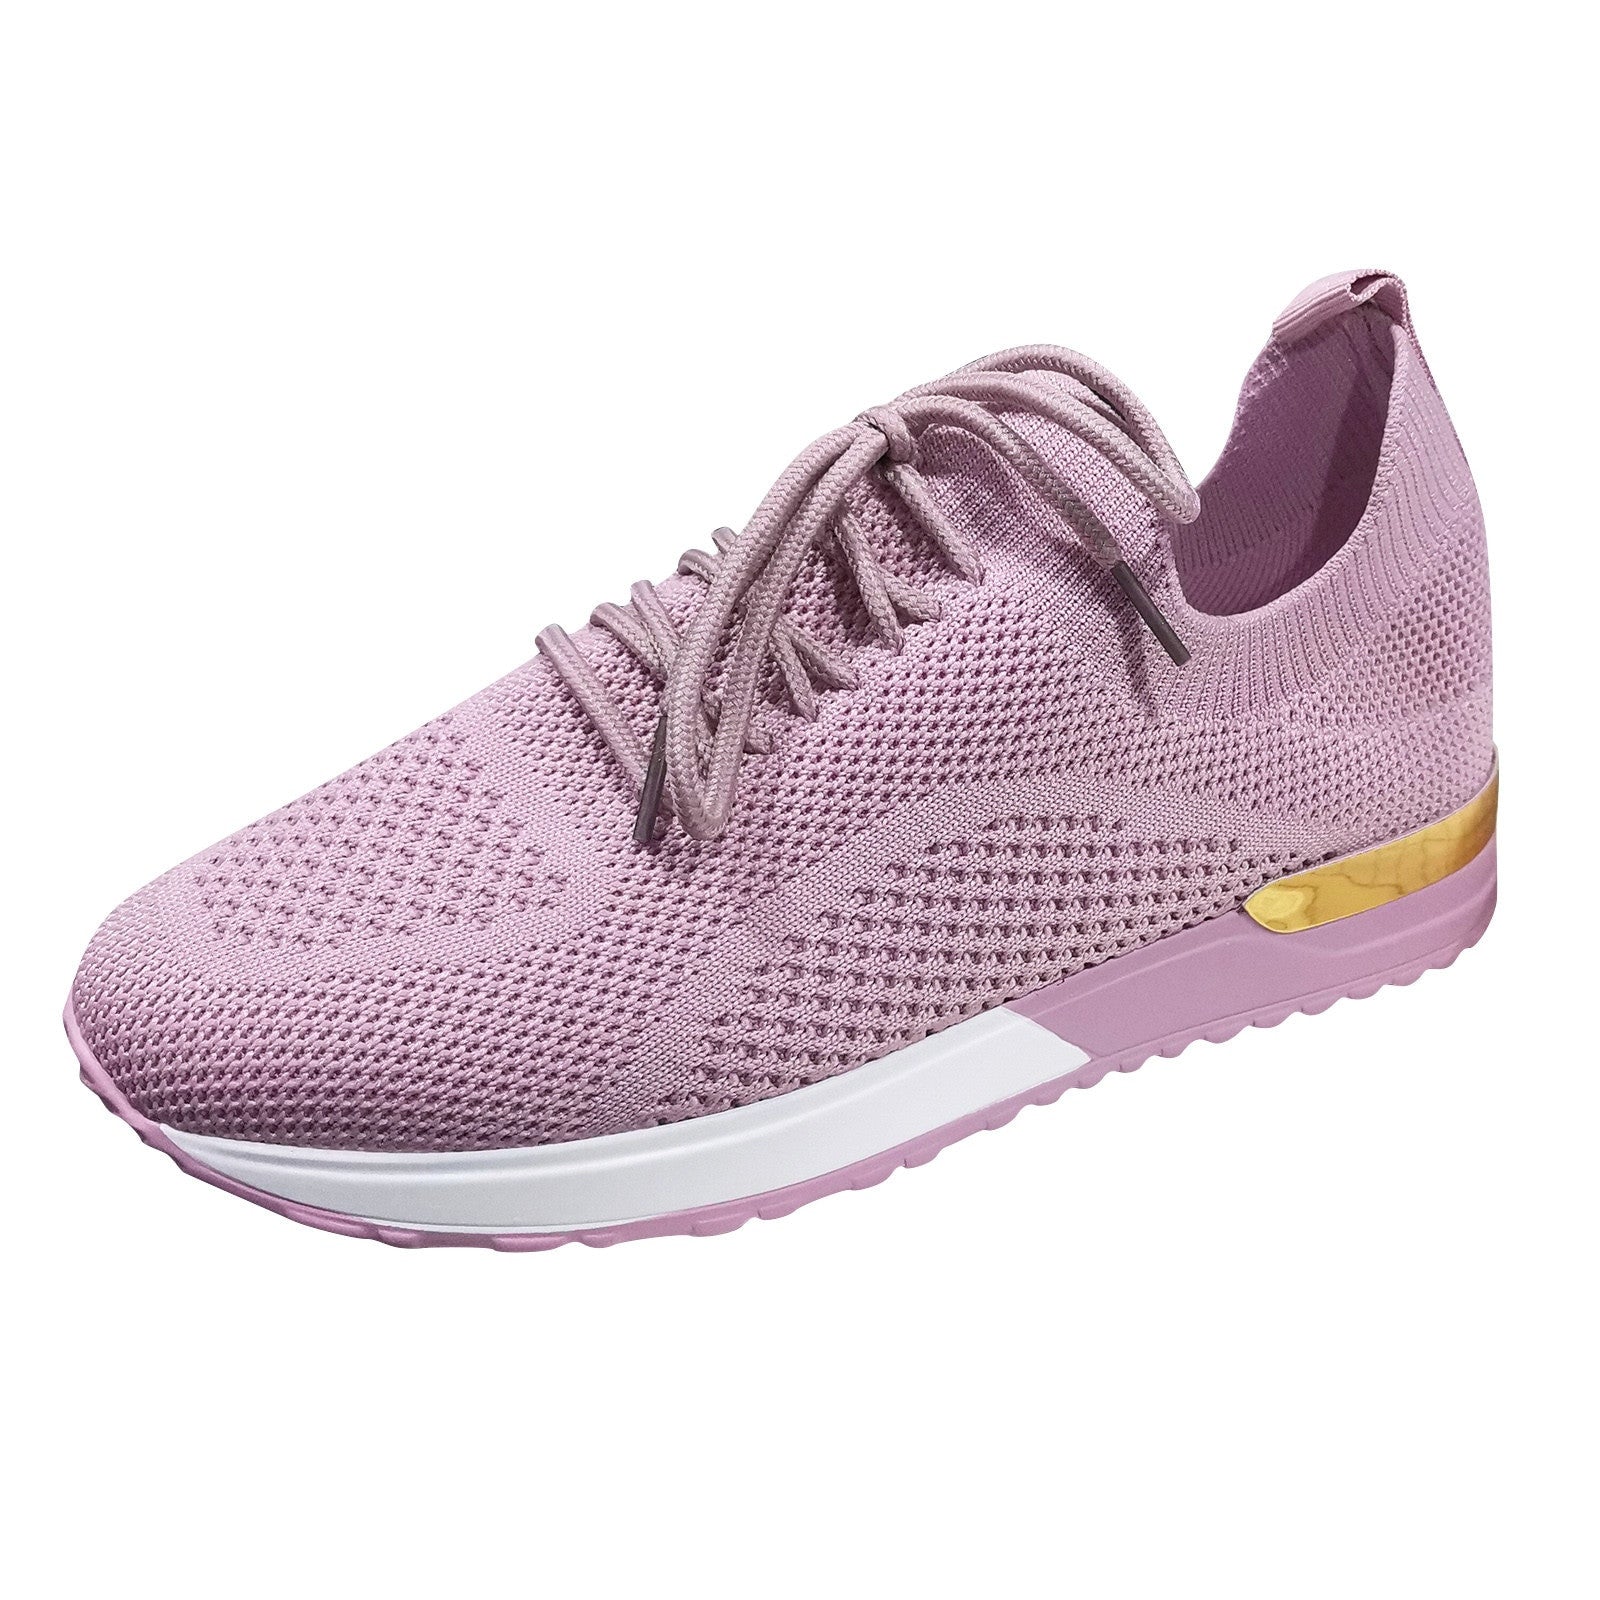 Women Orthopedic Sneakers Knitted Leisure Shoes